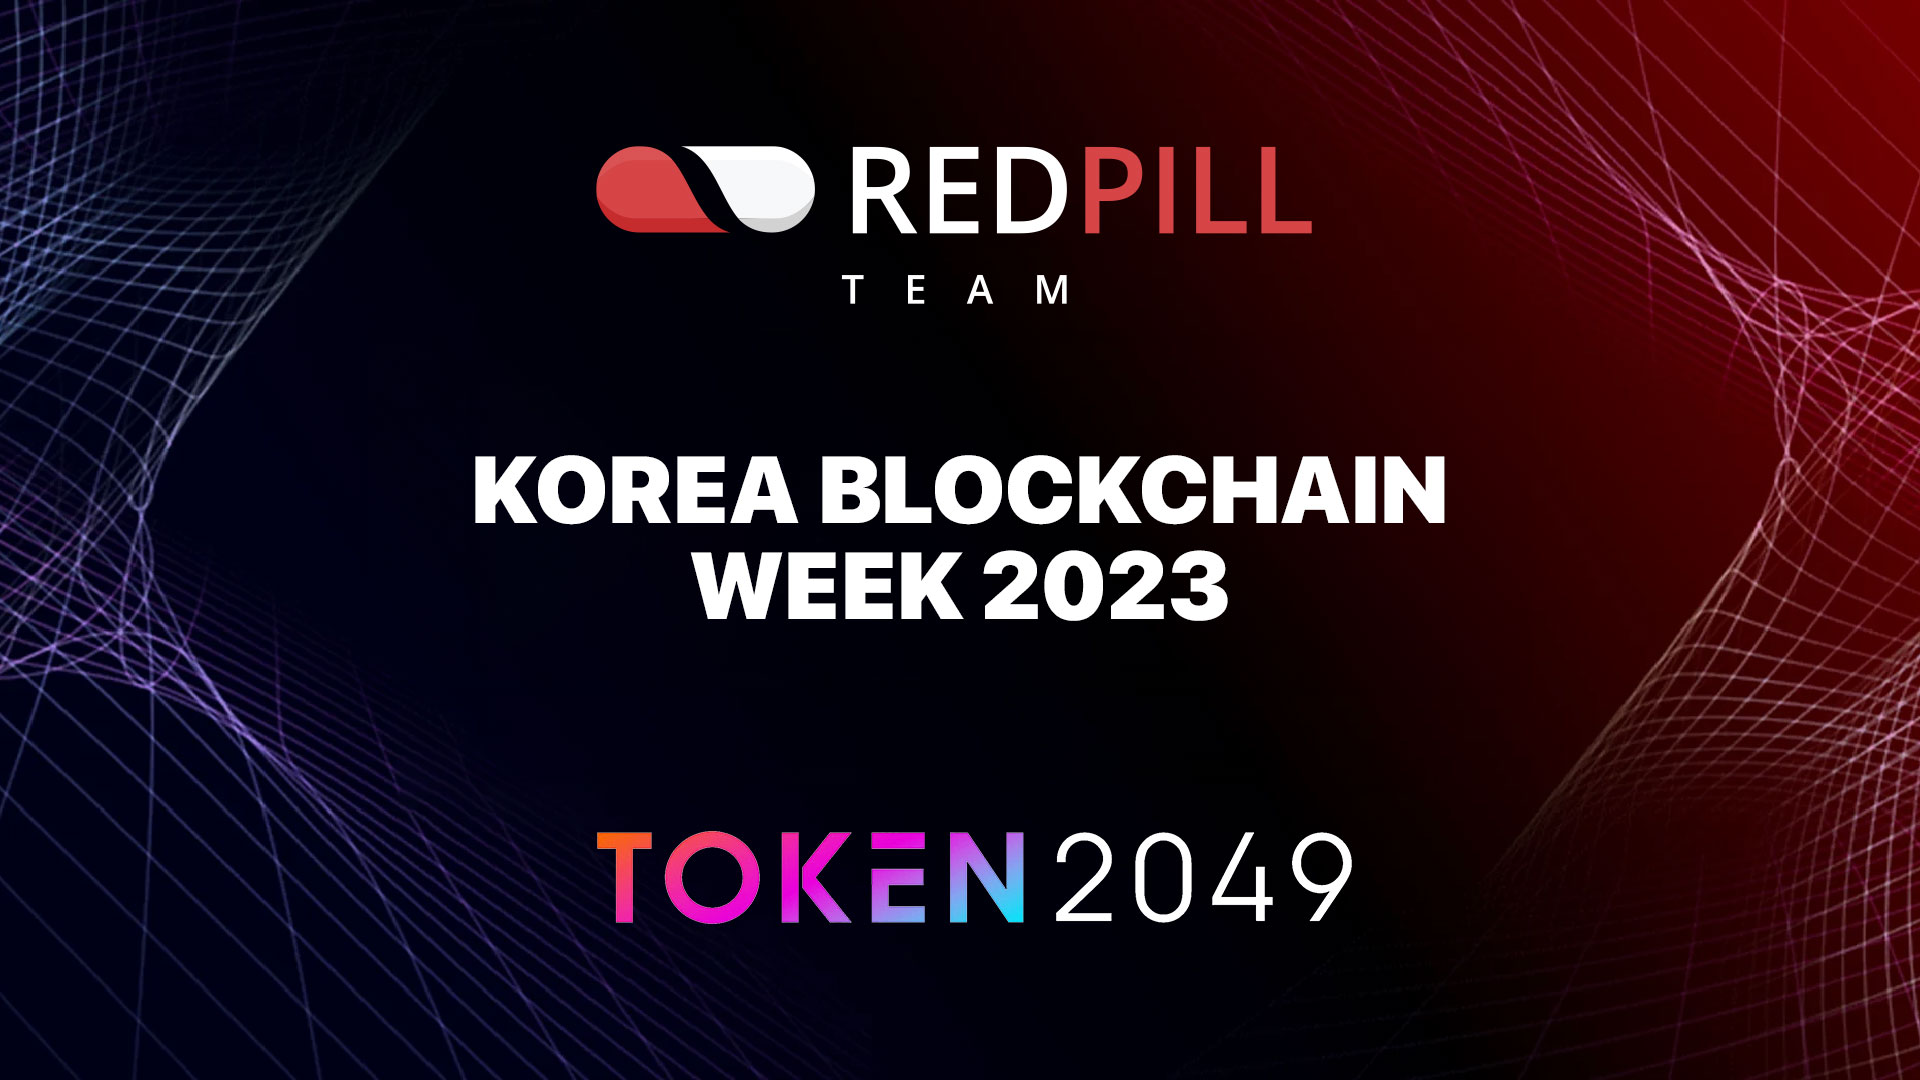 Red Pill Team’s Visit to Korea Blockchain Week and TOKEN2049